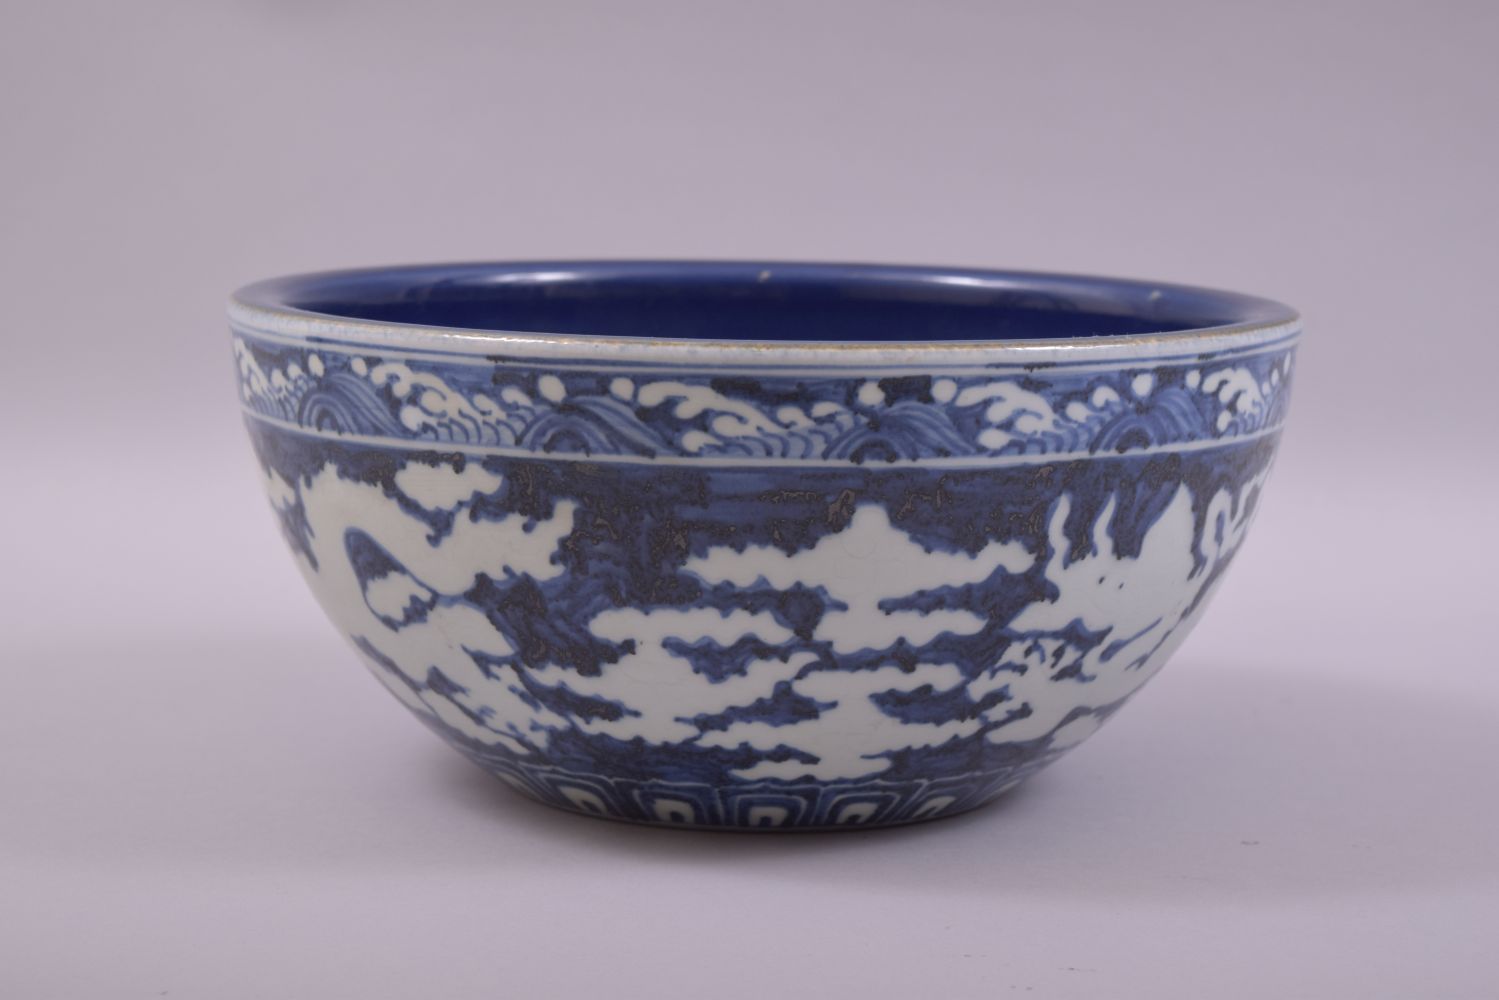 A LARGE CHINESE SACRIFICIAL BLUE GLAZE DRAGON BOWL, the exterior with white dragons and clouds - Image 4 of 7